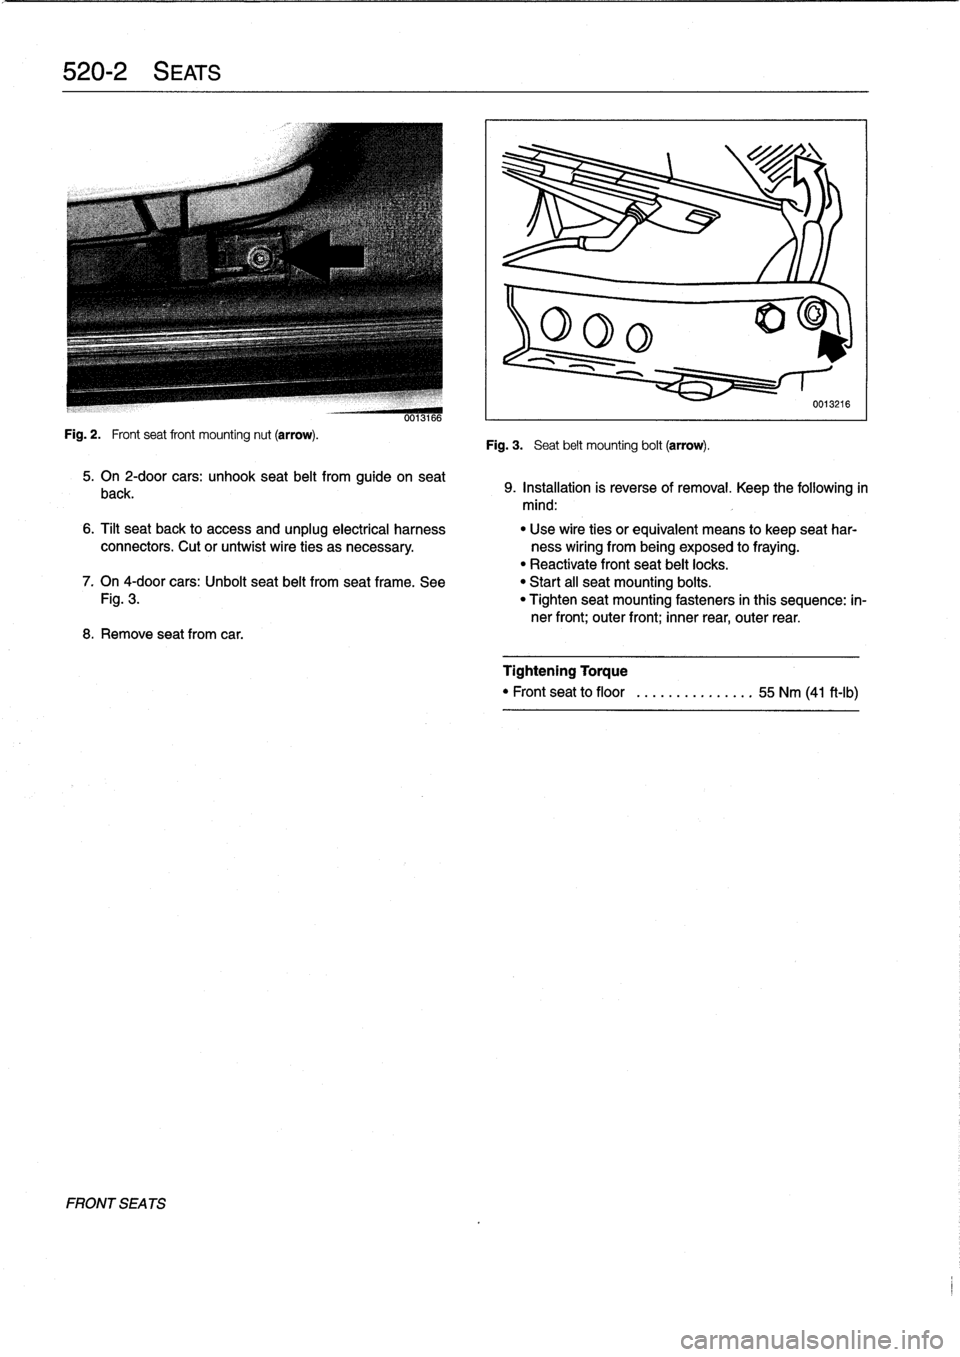 BMW 328i 1994 E36 Workshop Manual 520-2

	

S
EATS

Fig
.
2
.

	

Frontseat
front
mounting
nut
(arrow)
.

FRONT
SEA
TS

0013166

5
.
On
2-door
cars
:
unhook
seat
belt
from
guide
on
seat

back
.

8
.
Remove
seatfrom
car
.

Fig
.
3
.

	